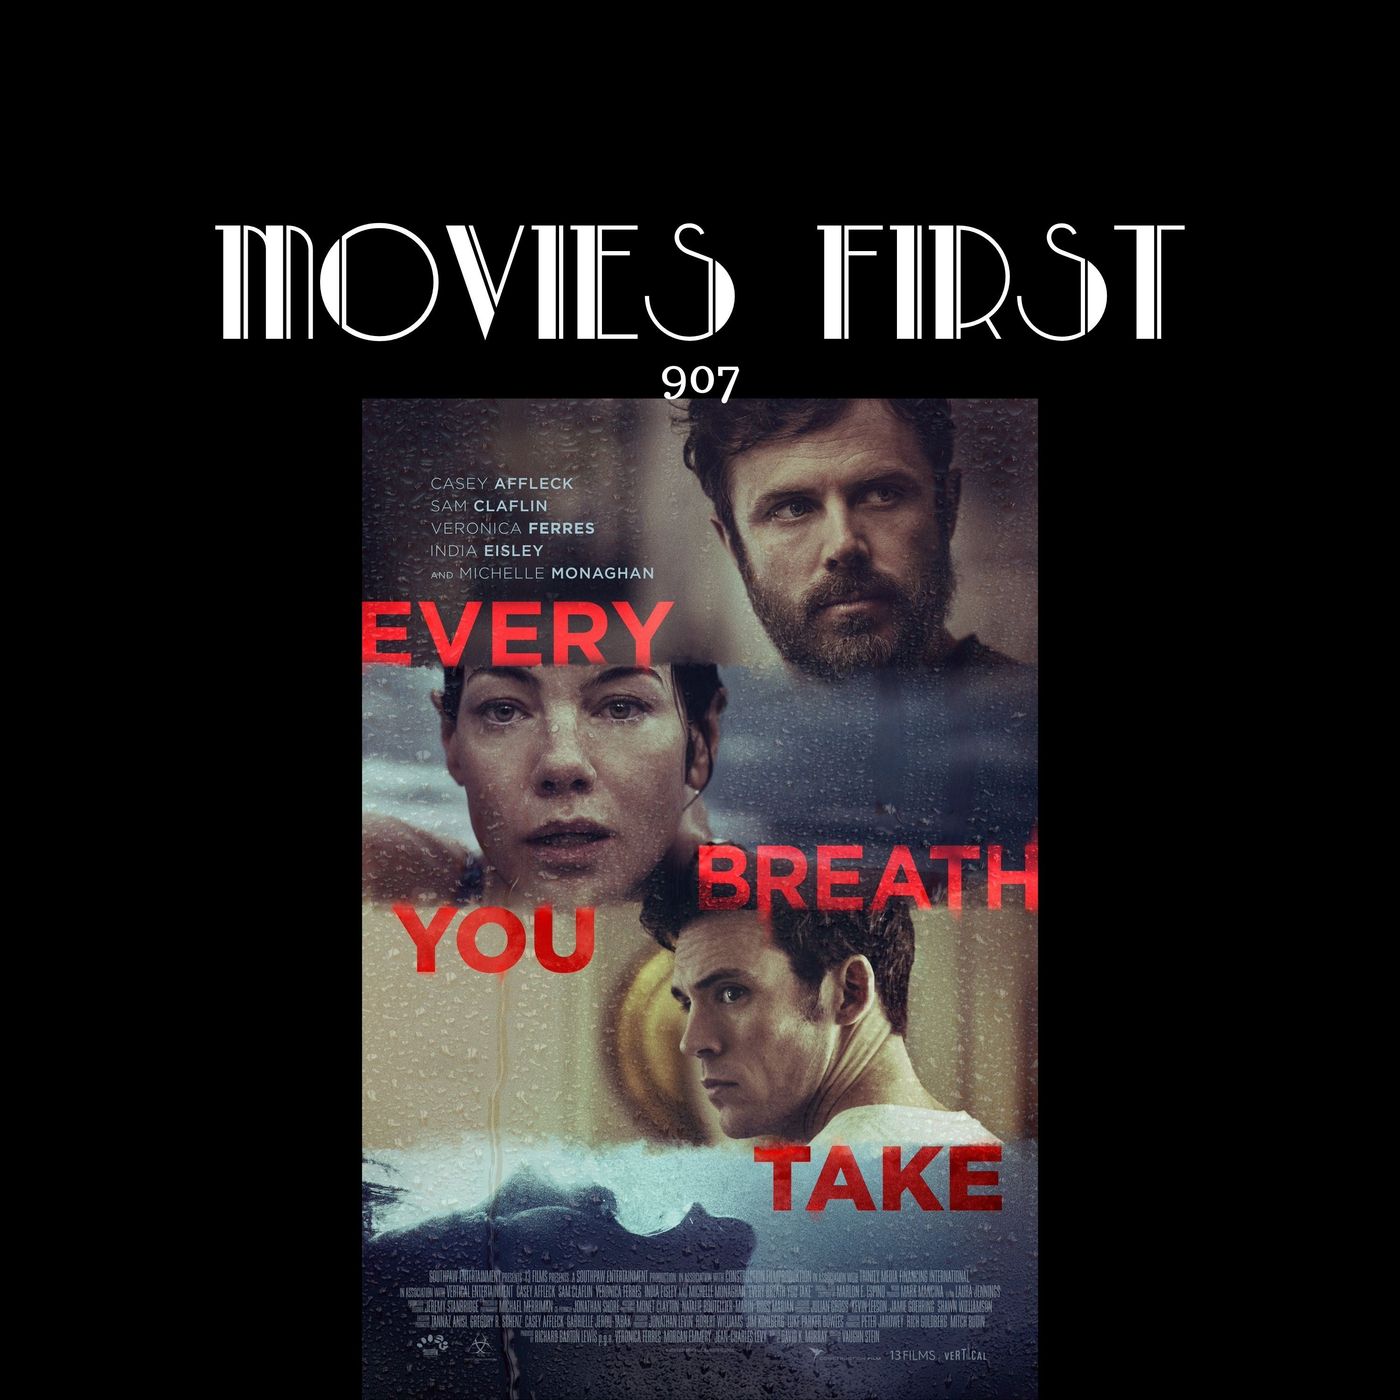 Every Breath You Take (Drama, Mystery, Thriller) (the @MoviesFirst review)